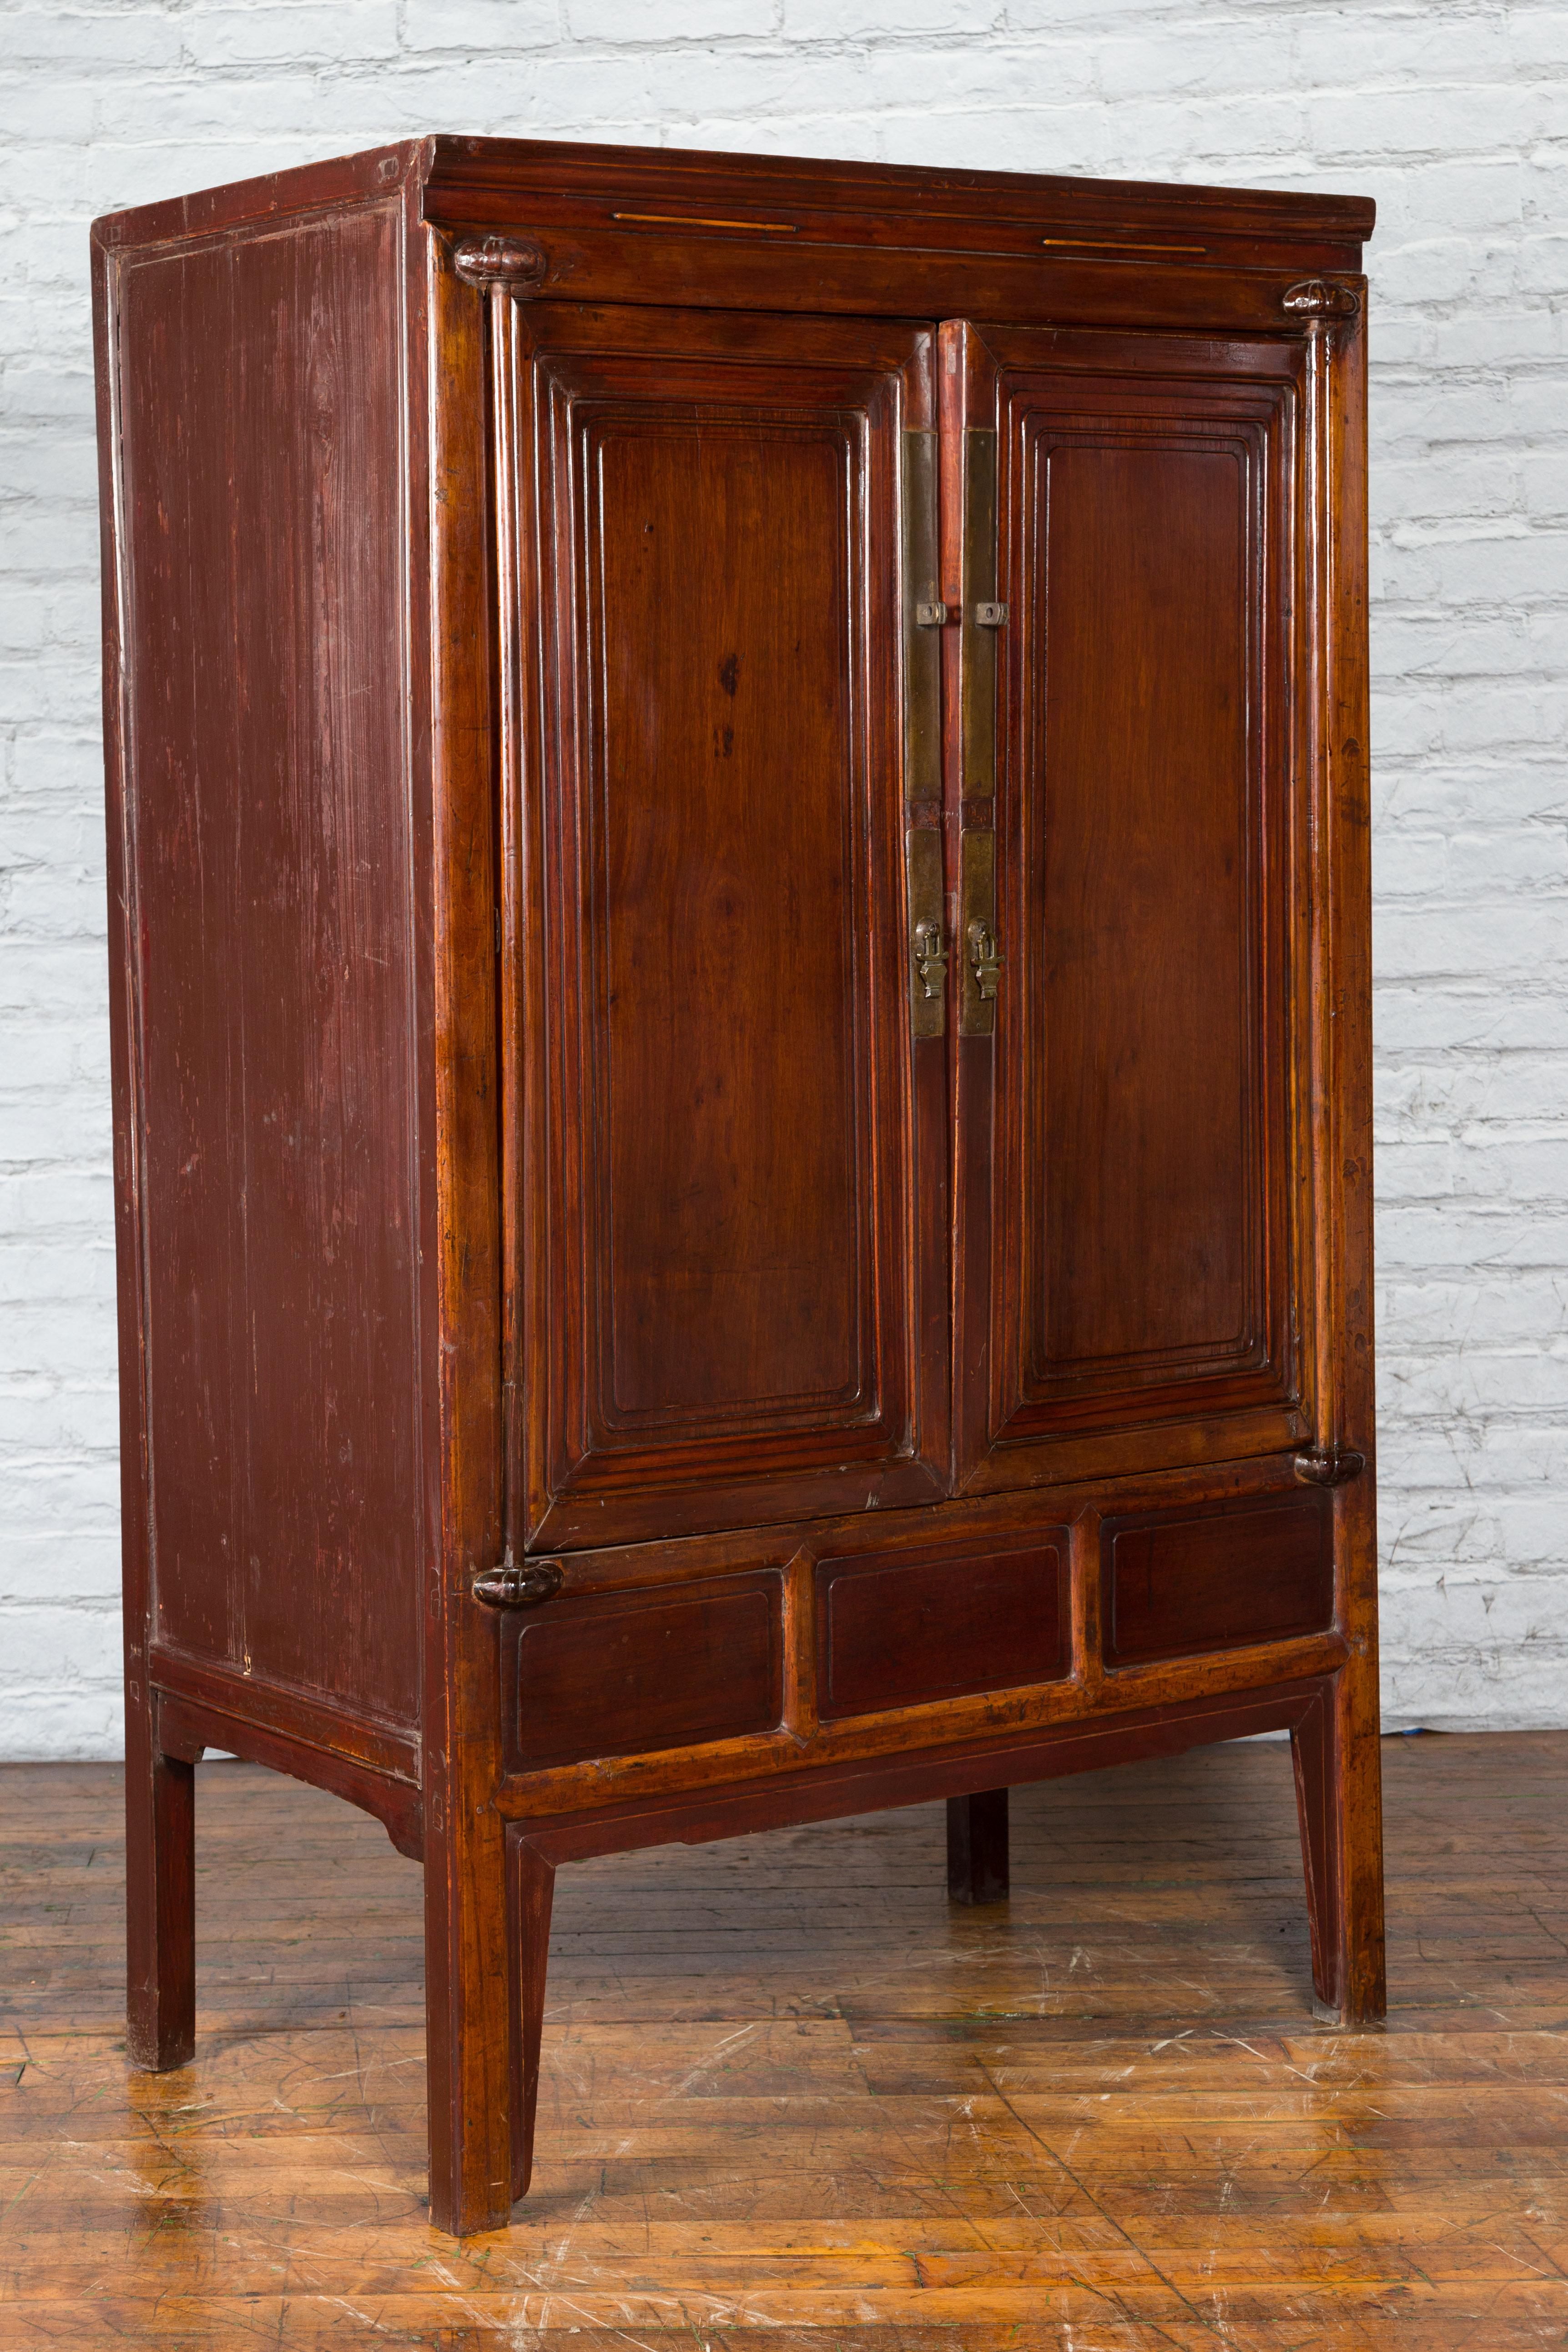 Chinese Qing Dynasty 19th Century Ningbo Cypress Cabinet with Brass Hardware In Good Condition For Sale In Yonkers, NY